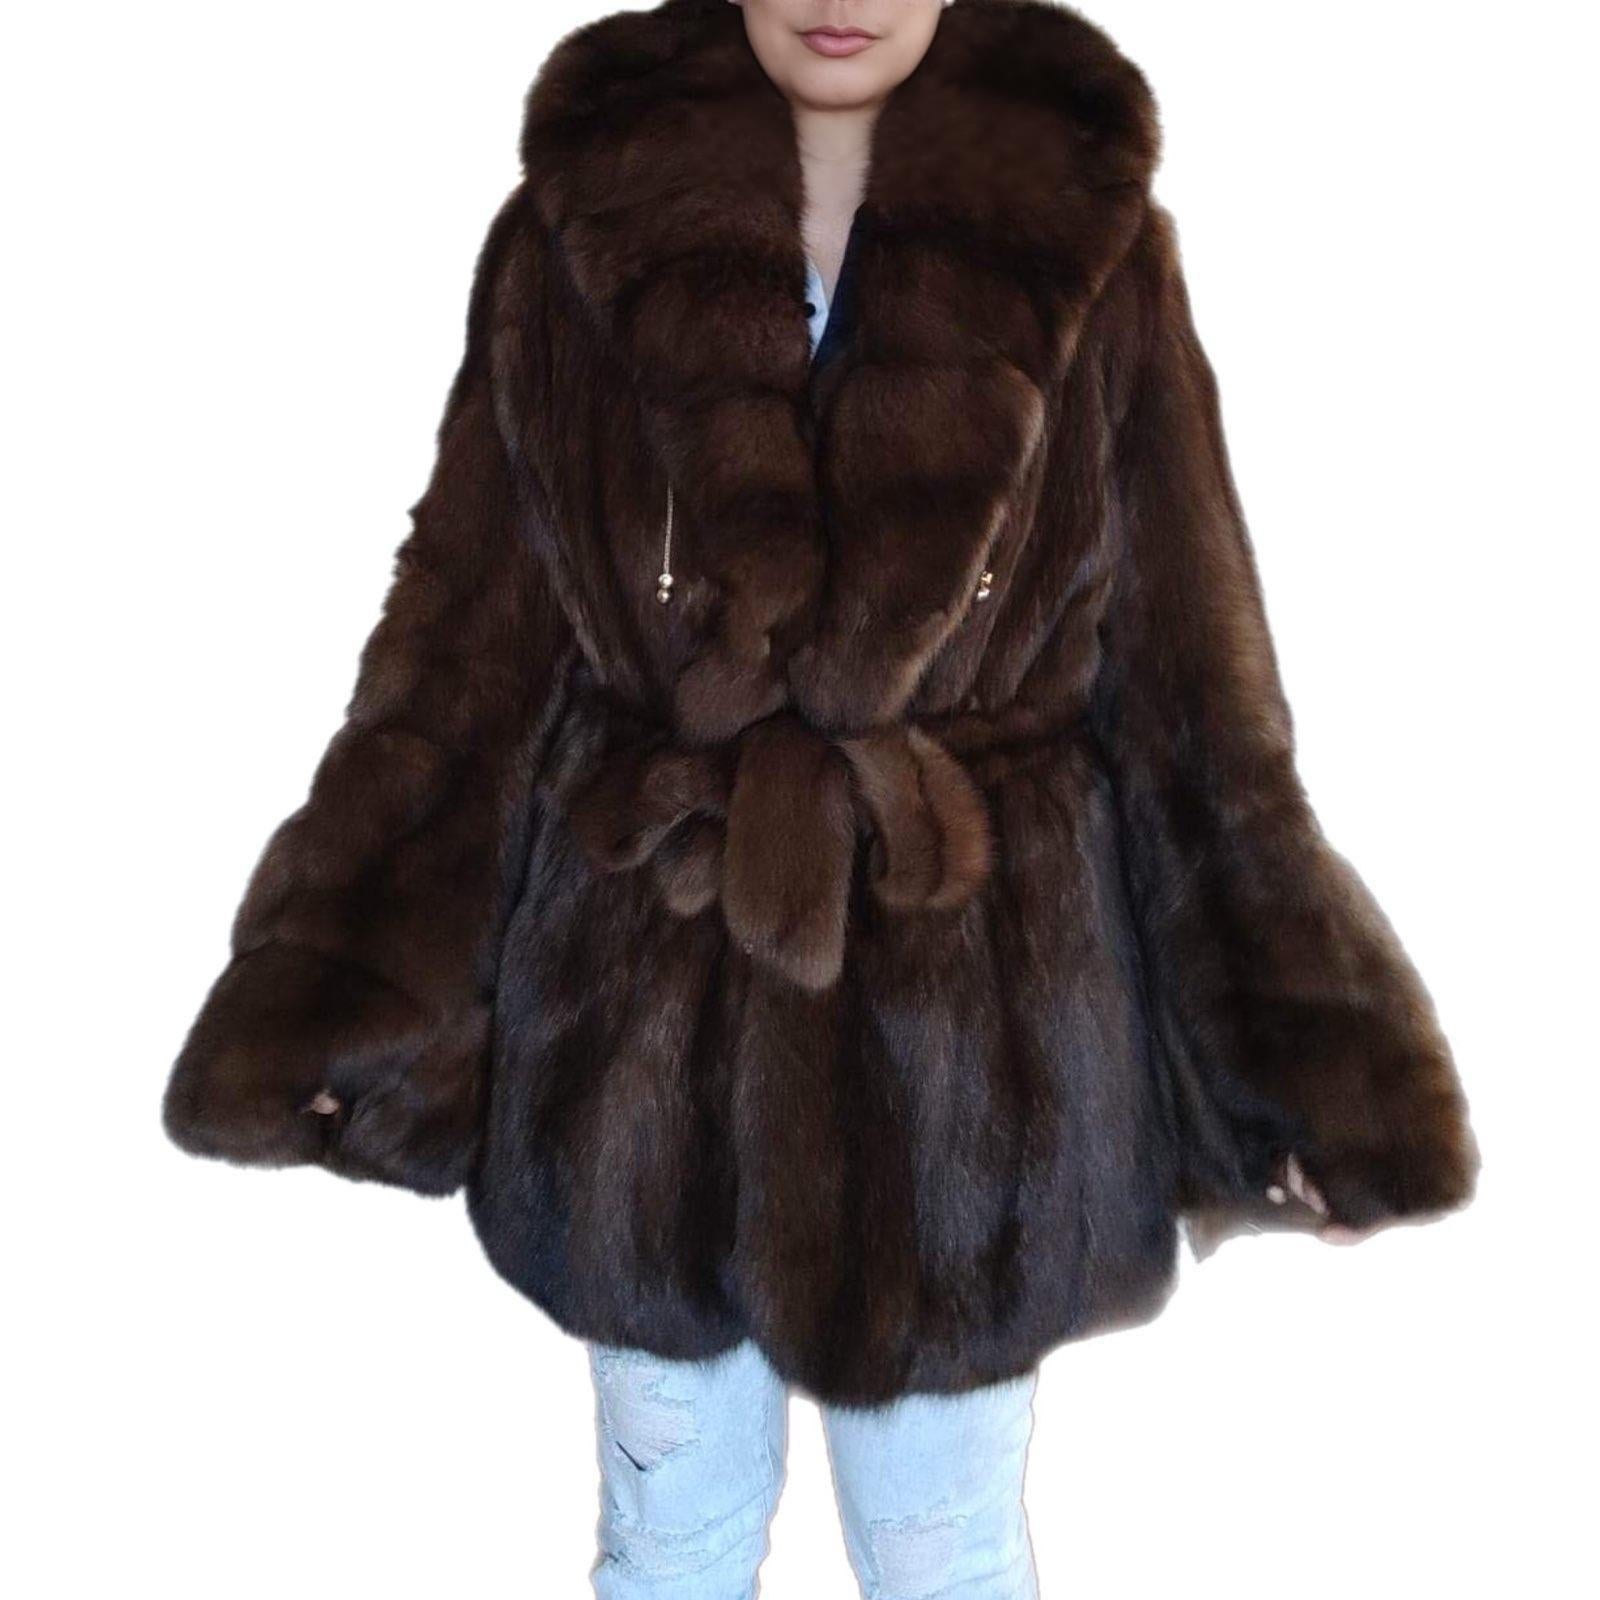 Christian Dior Russian Sable fur coat size 12 tags 55000$ For Sale 11